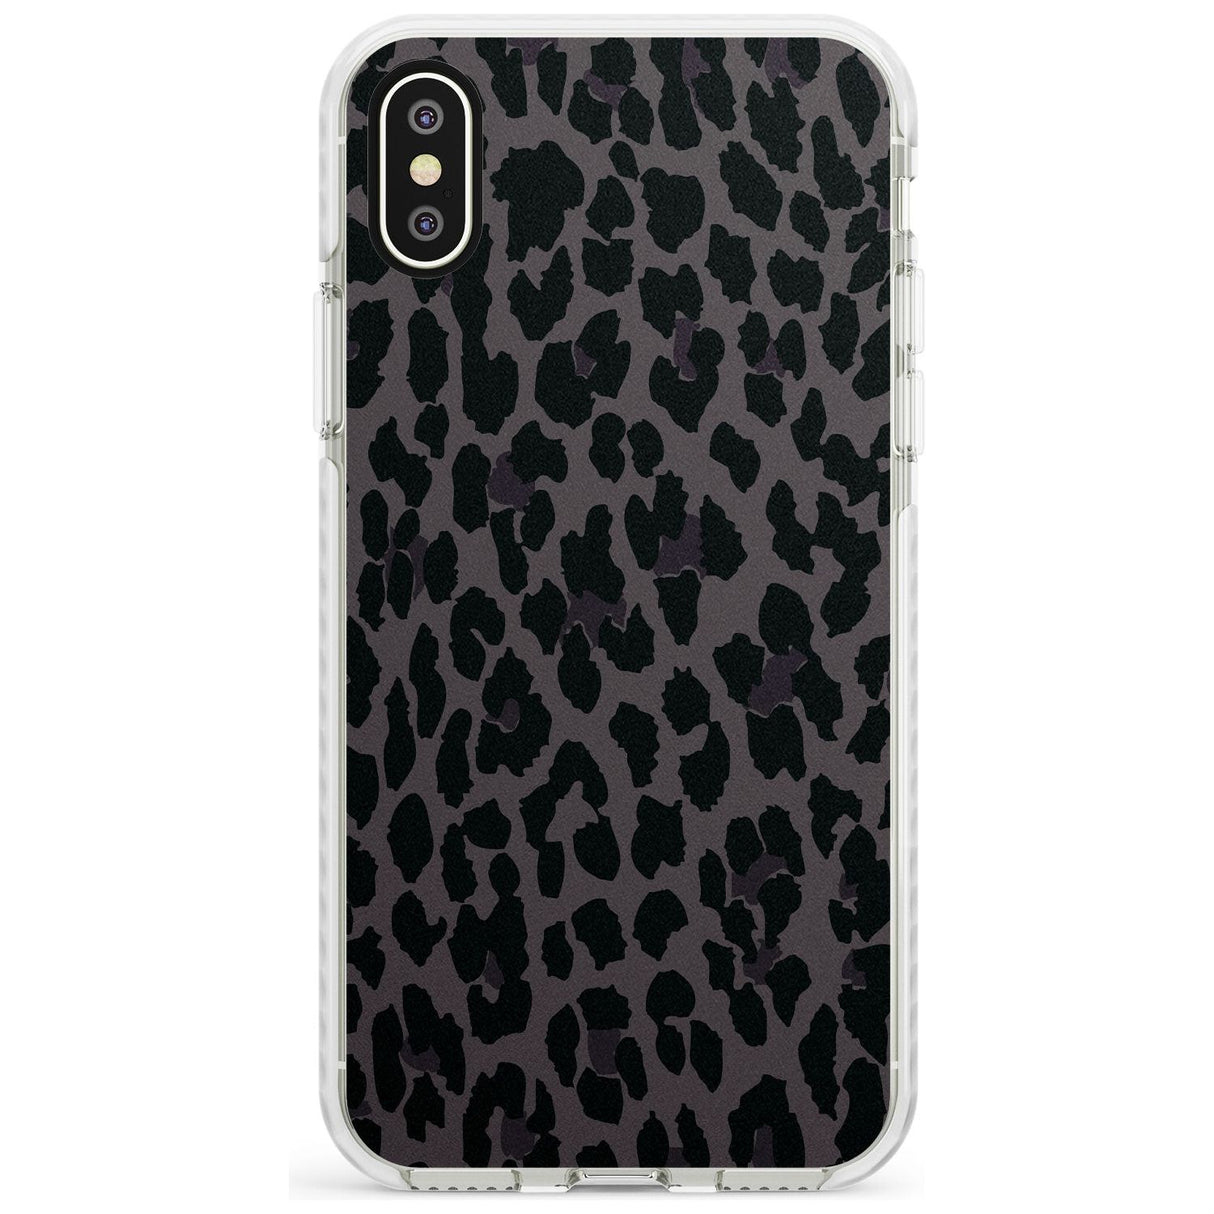 Dark Animal Print Pattern Large Leopard Impact Phone Case for iPhone X XS Max XR